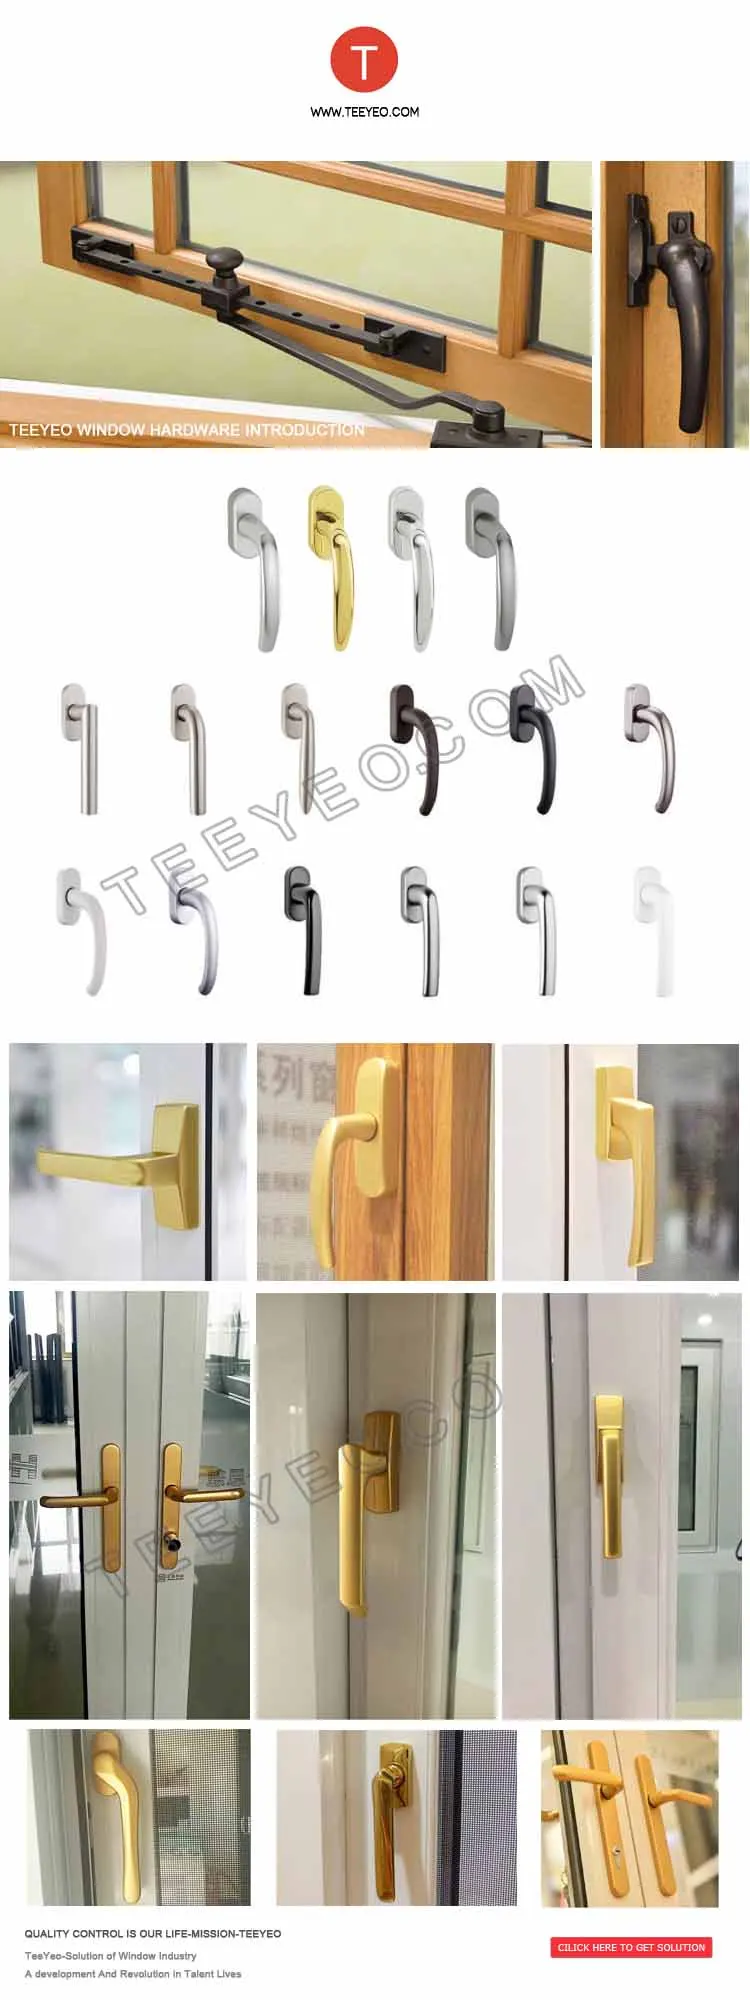 Happy New Year Sales Promotion 48 x 60 vinyl frame colored glass sliding window